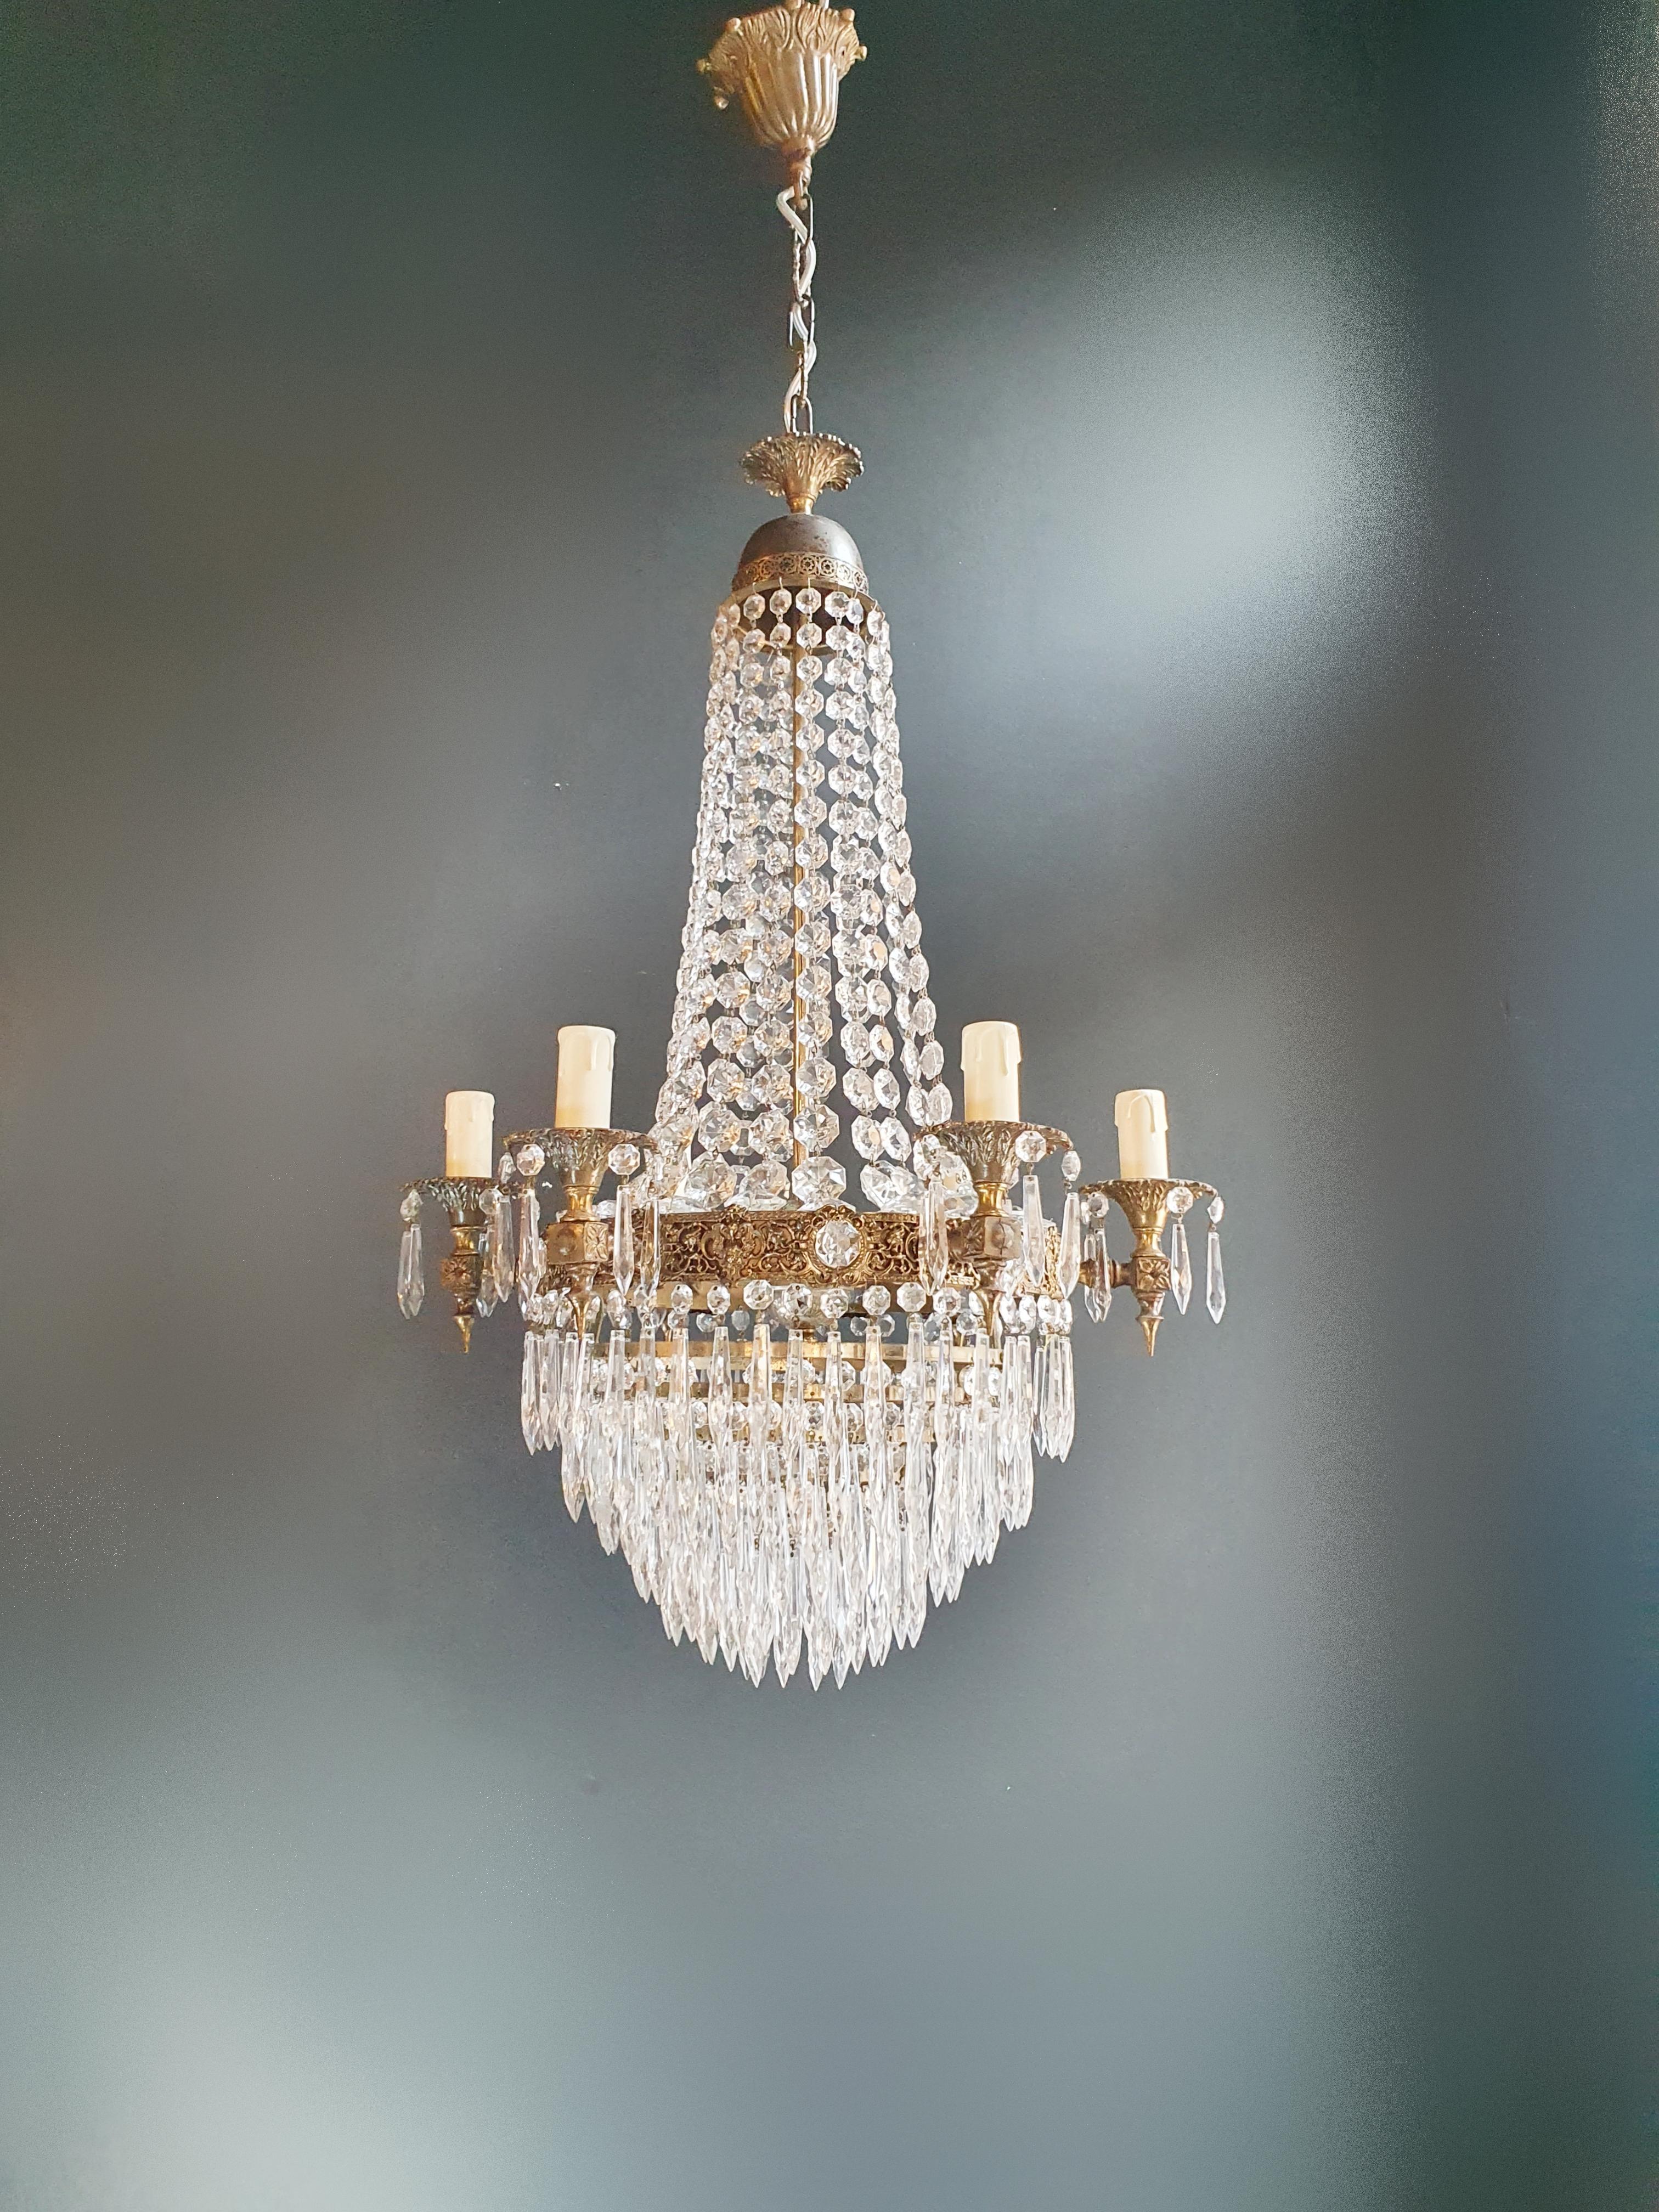 old chandelier with love and professionally restored in Berlin. electrical wiring works in the US.
Re-wired and ready to hang
not one missing
Cabling completely renewed. Crystal, hand-knotted.
Measures: Total height 110 cm, height without chain 75